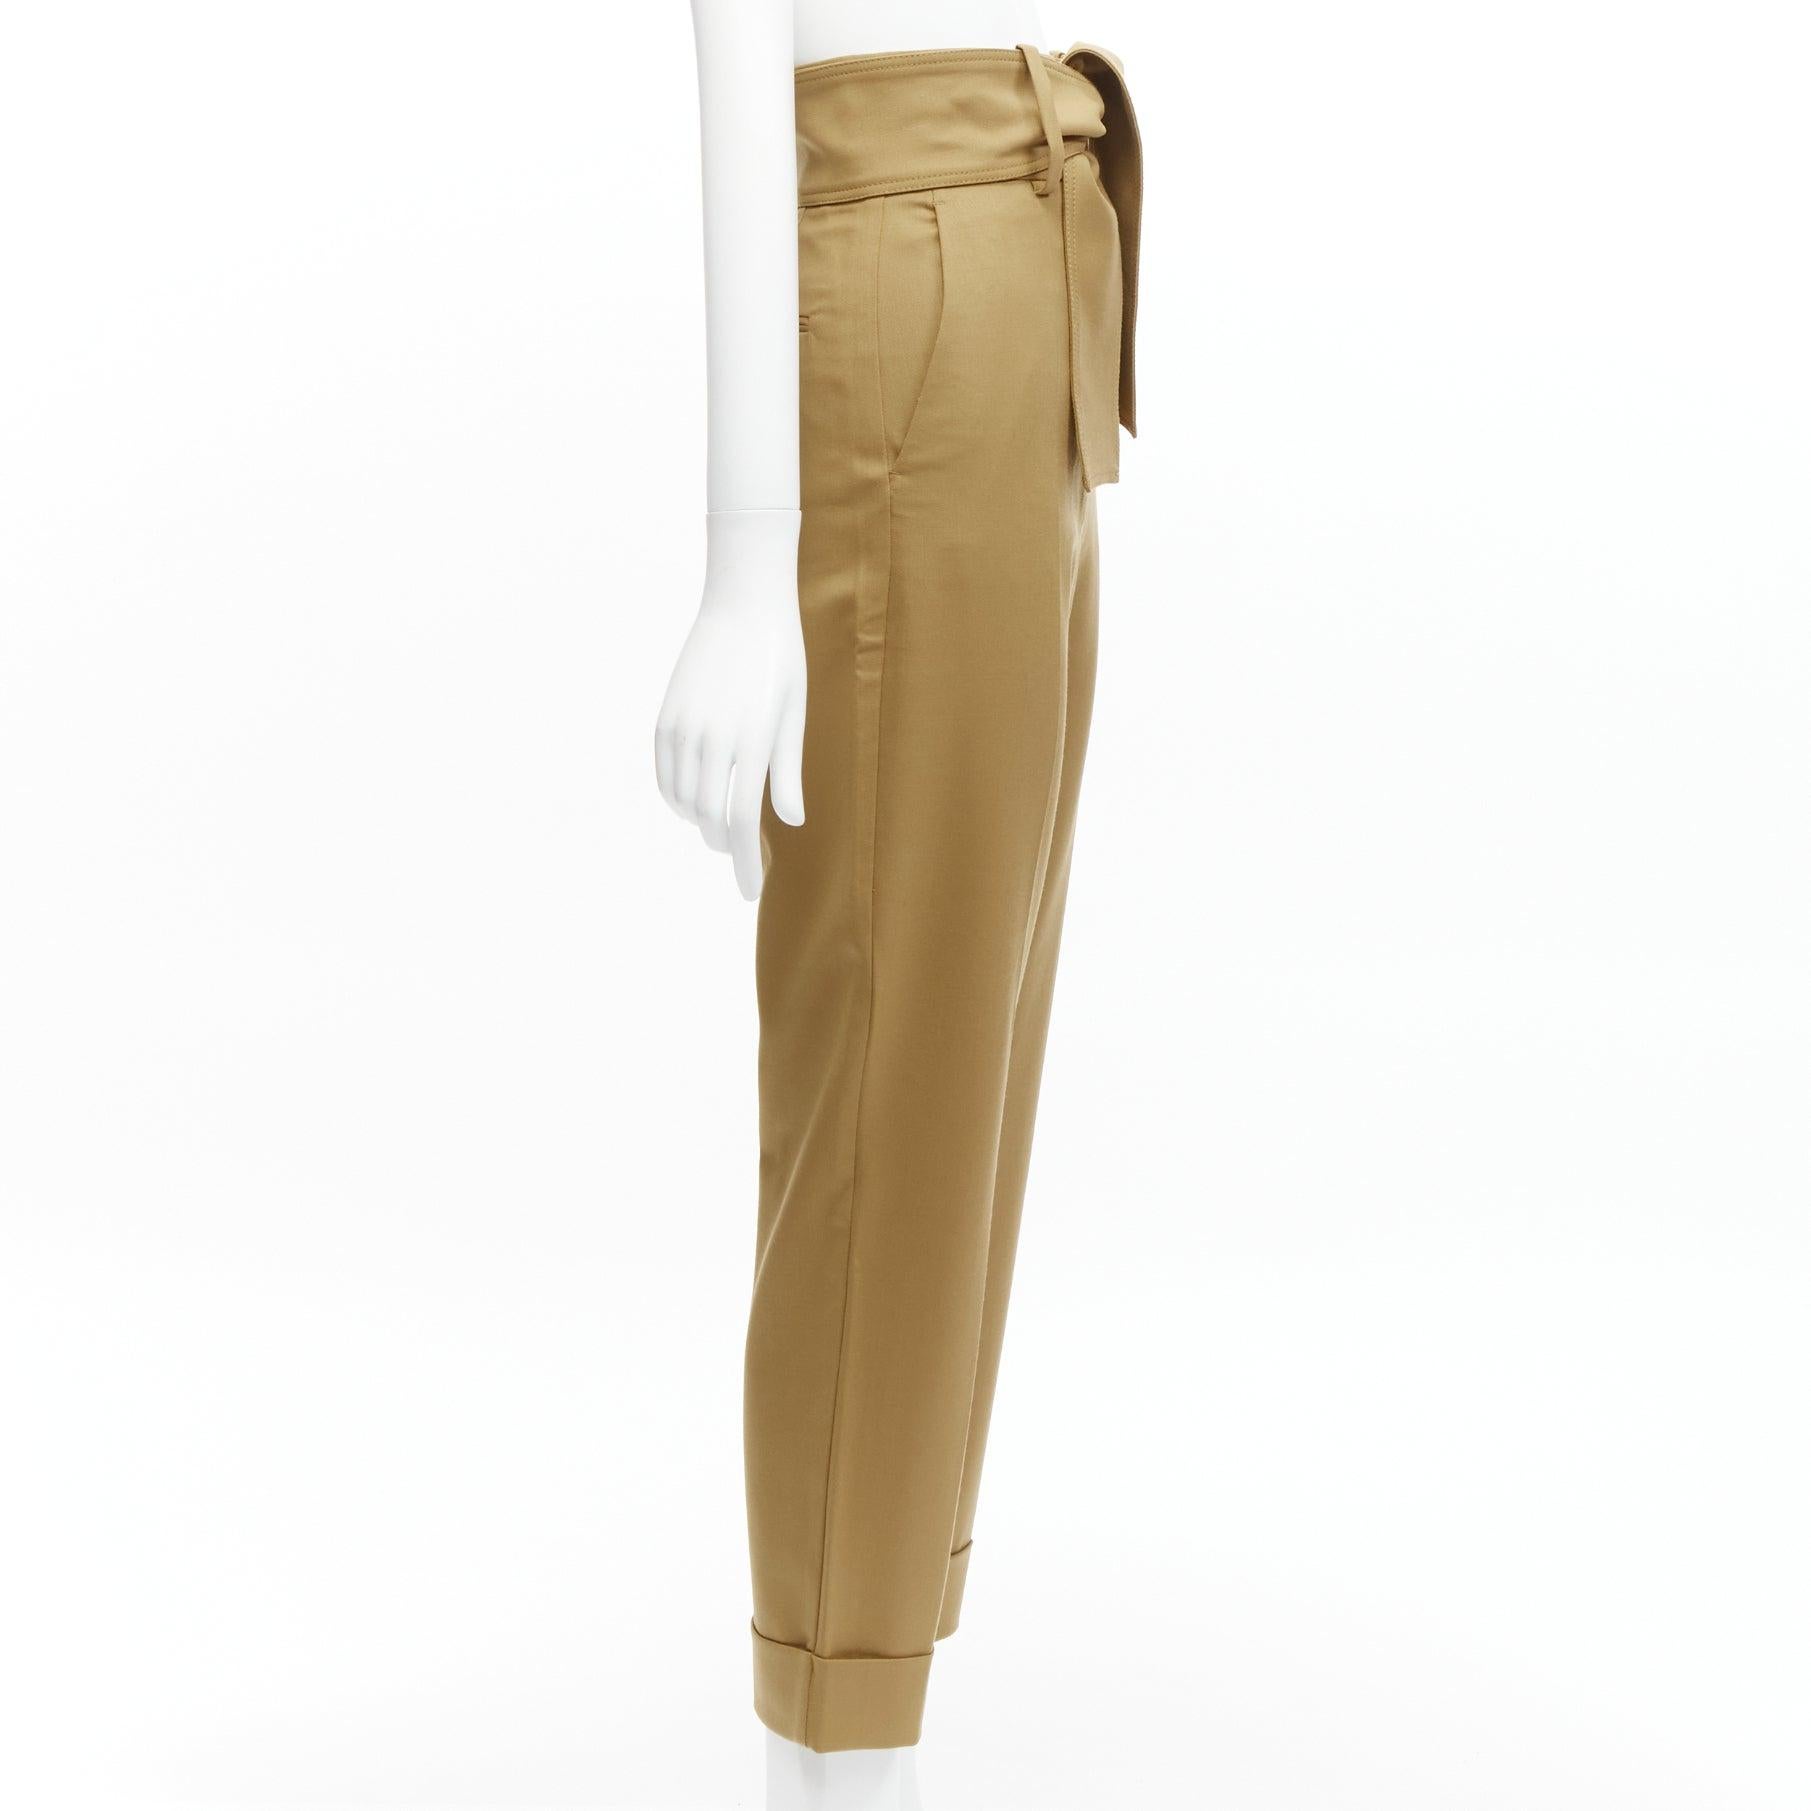 SARA BATTAGLIA khaki wool blend high waisted tie belt cuffed tapered pants In Excellent Condition For Sale In Hong Kong, NT